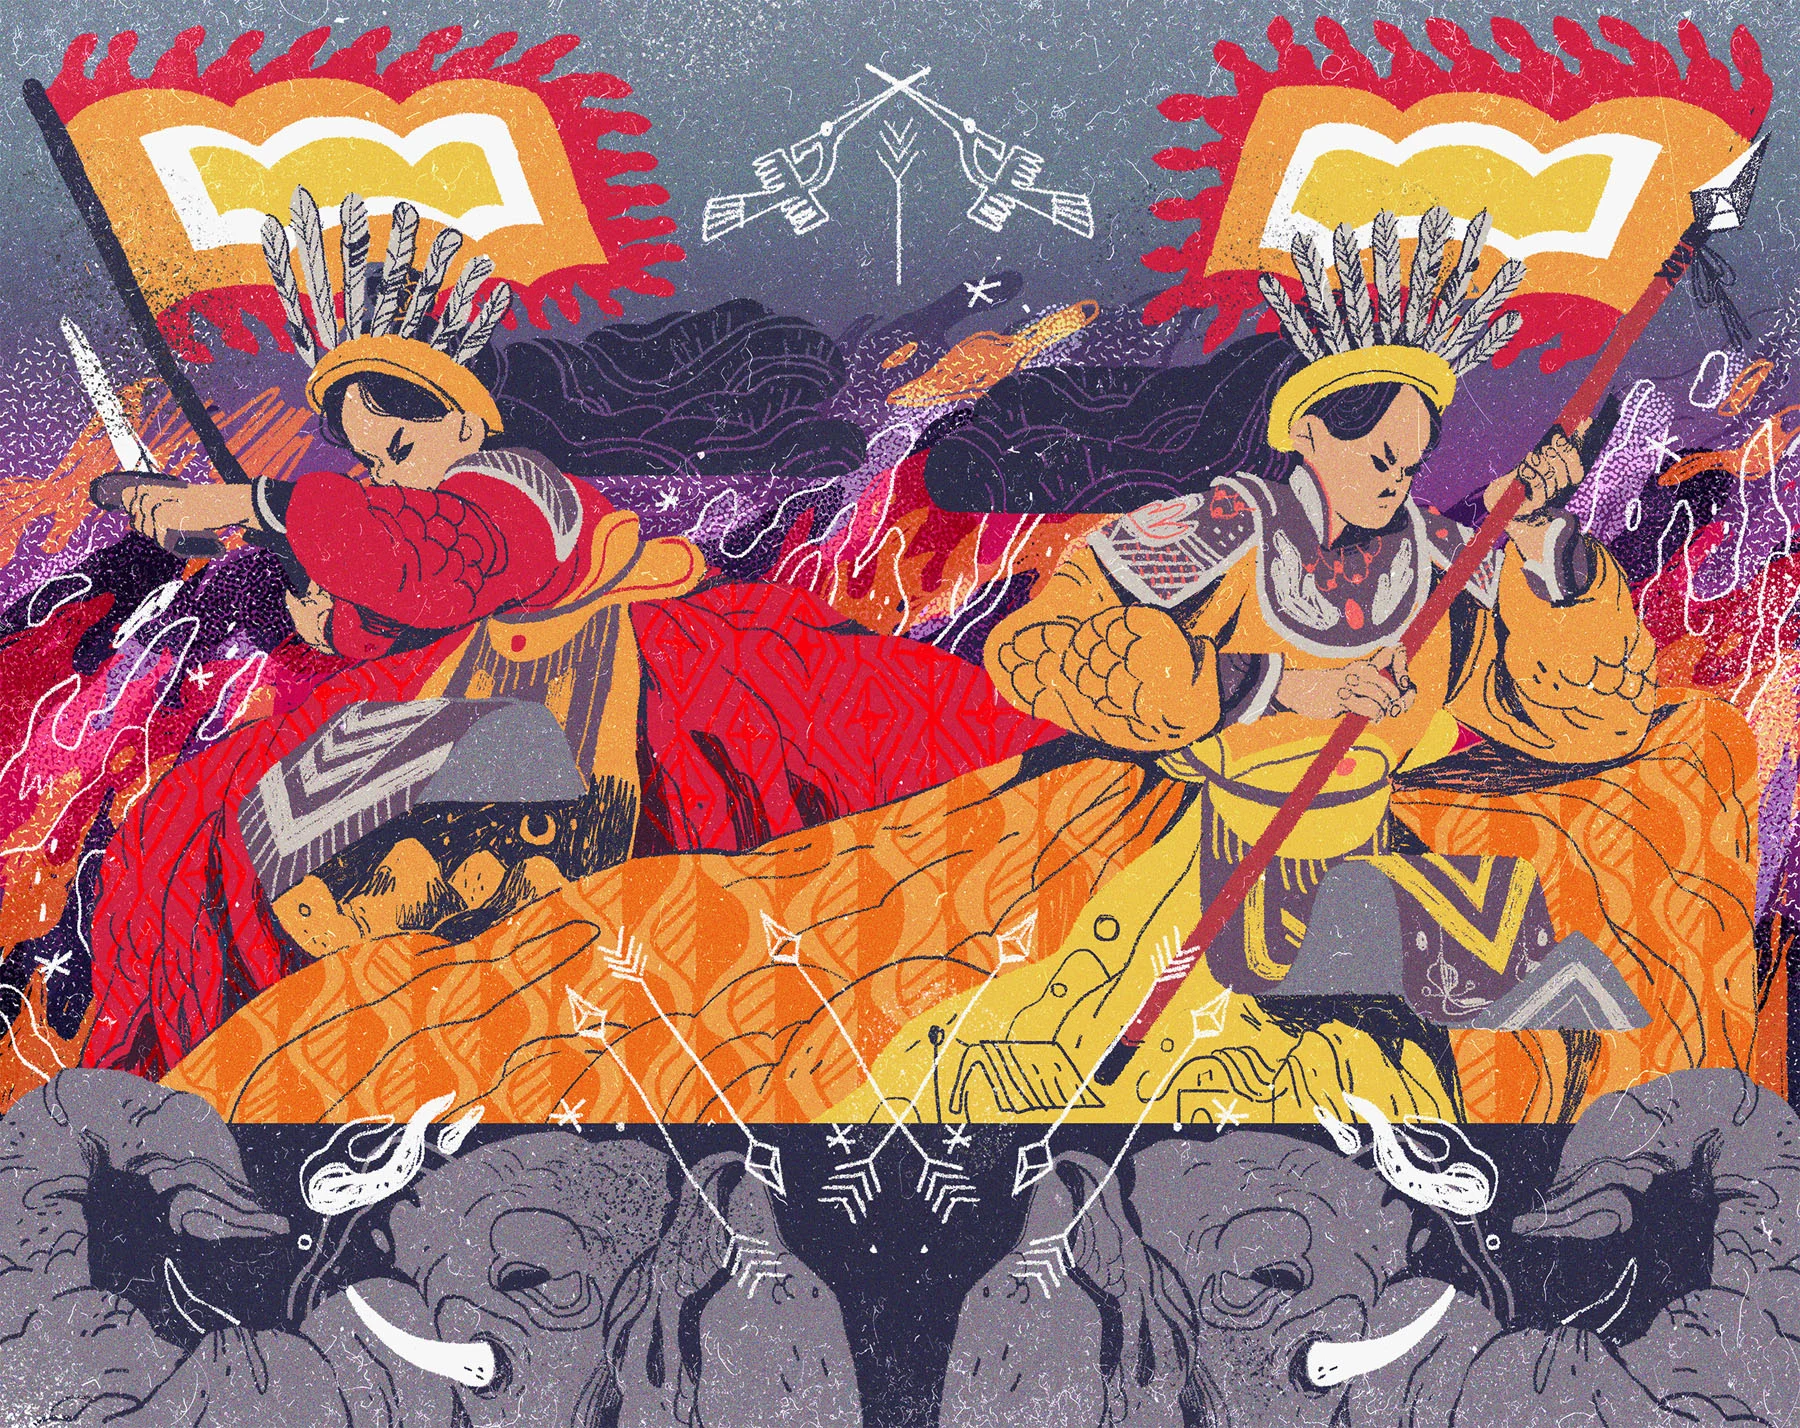 An illustration depicting two women holding weapons as if entering battle, surrounded by fire with flags flying high behind them. 
